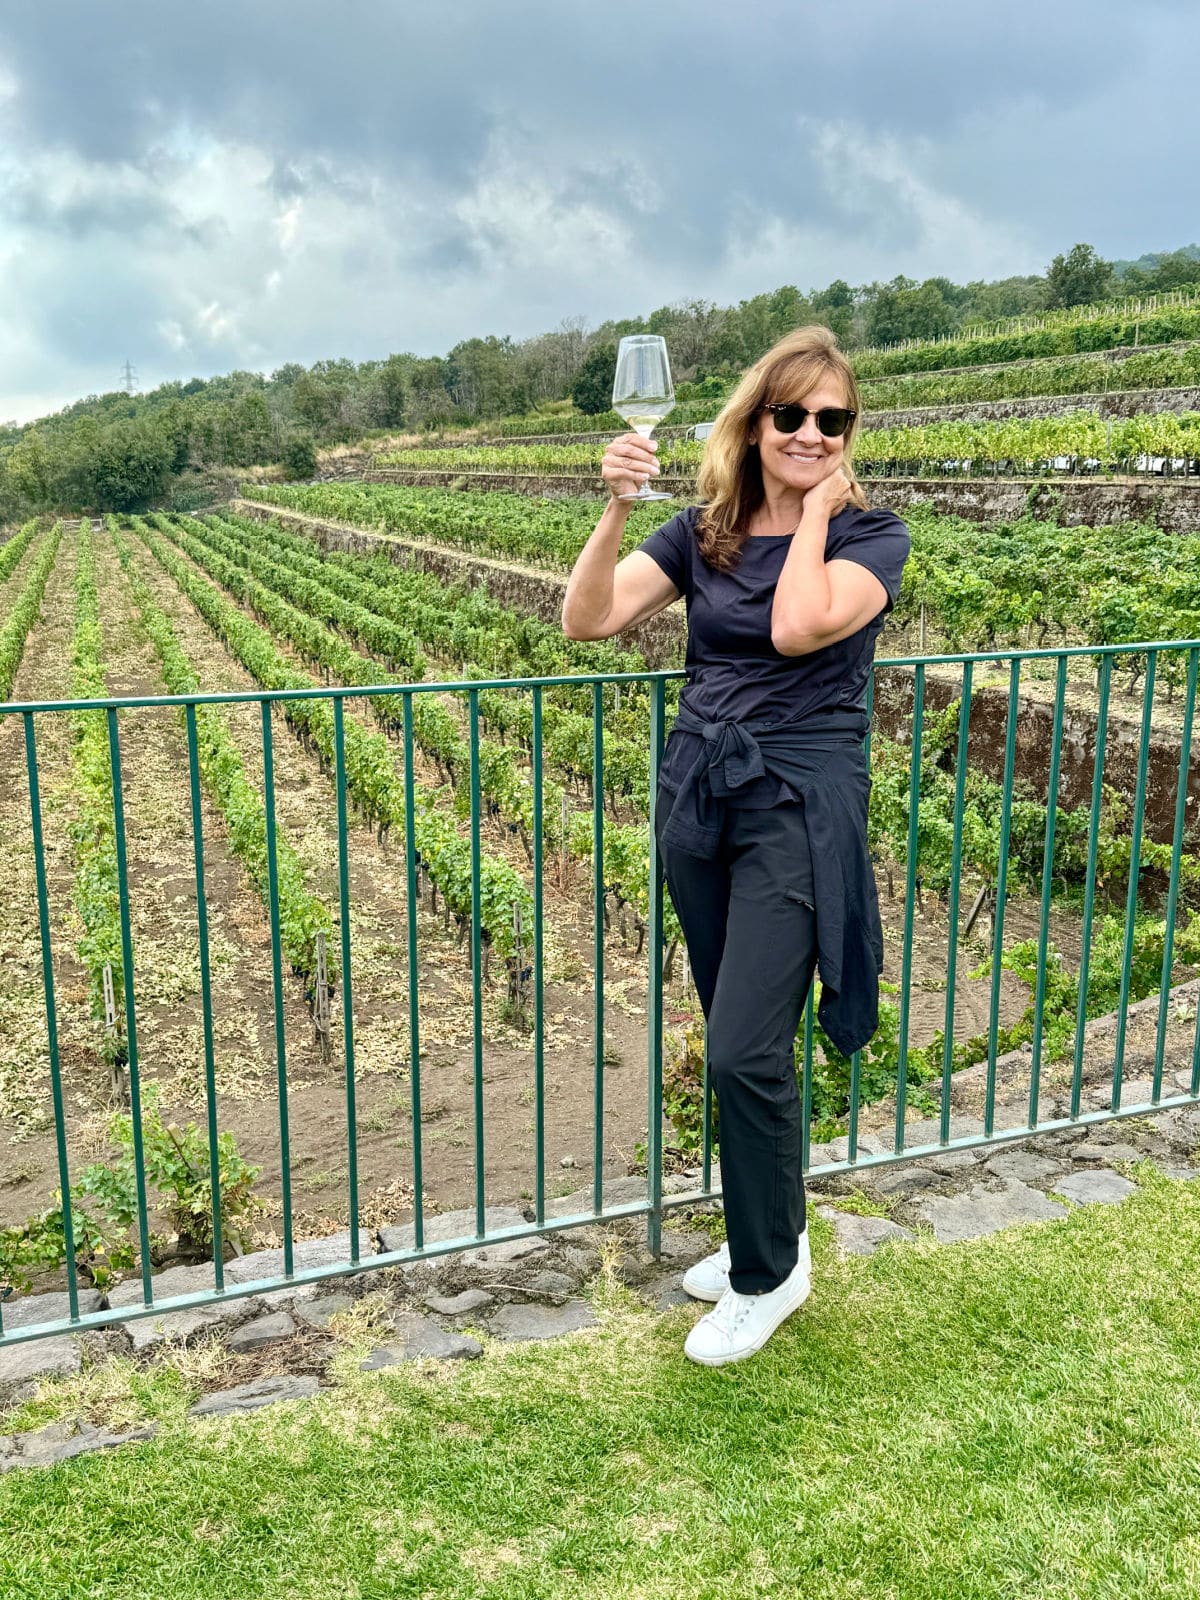 Woman holding wine glass up at vineyard.